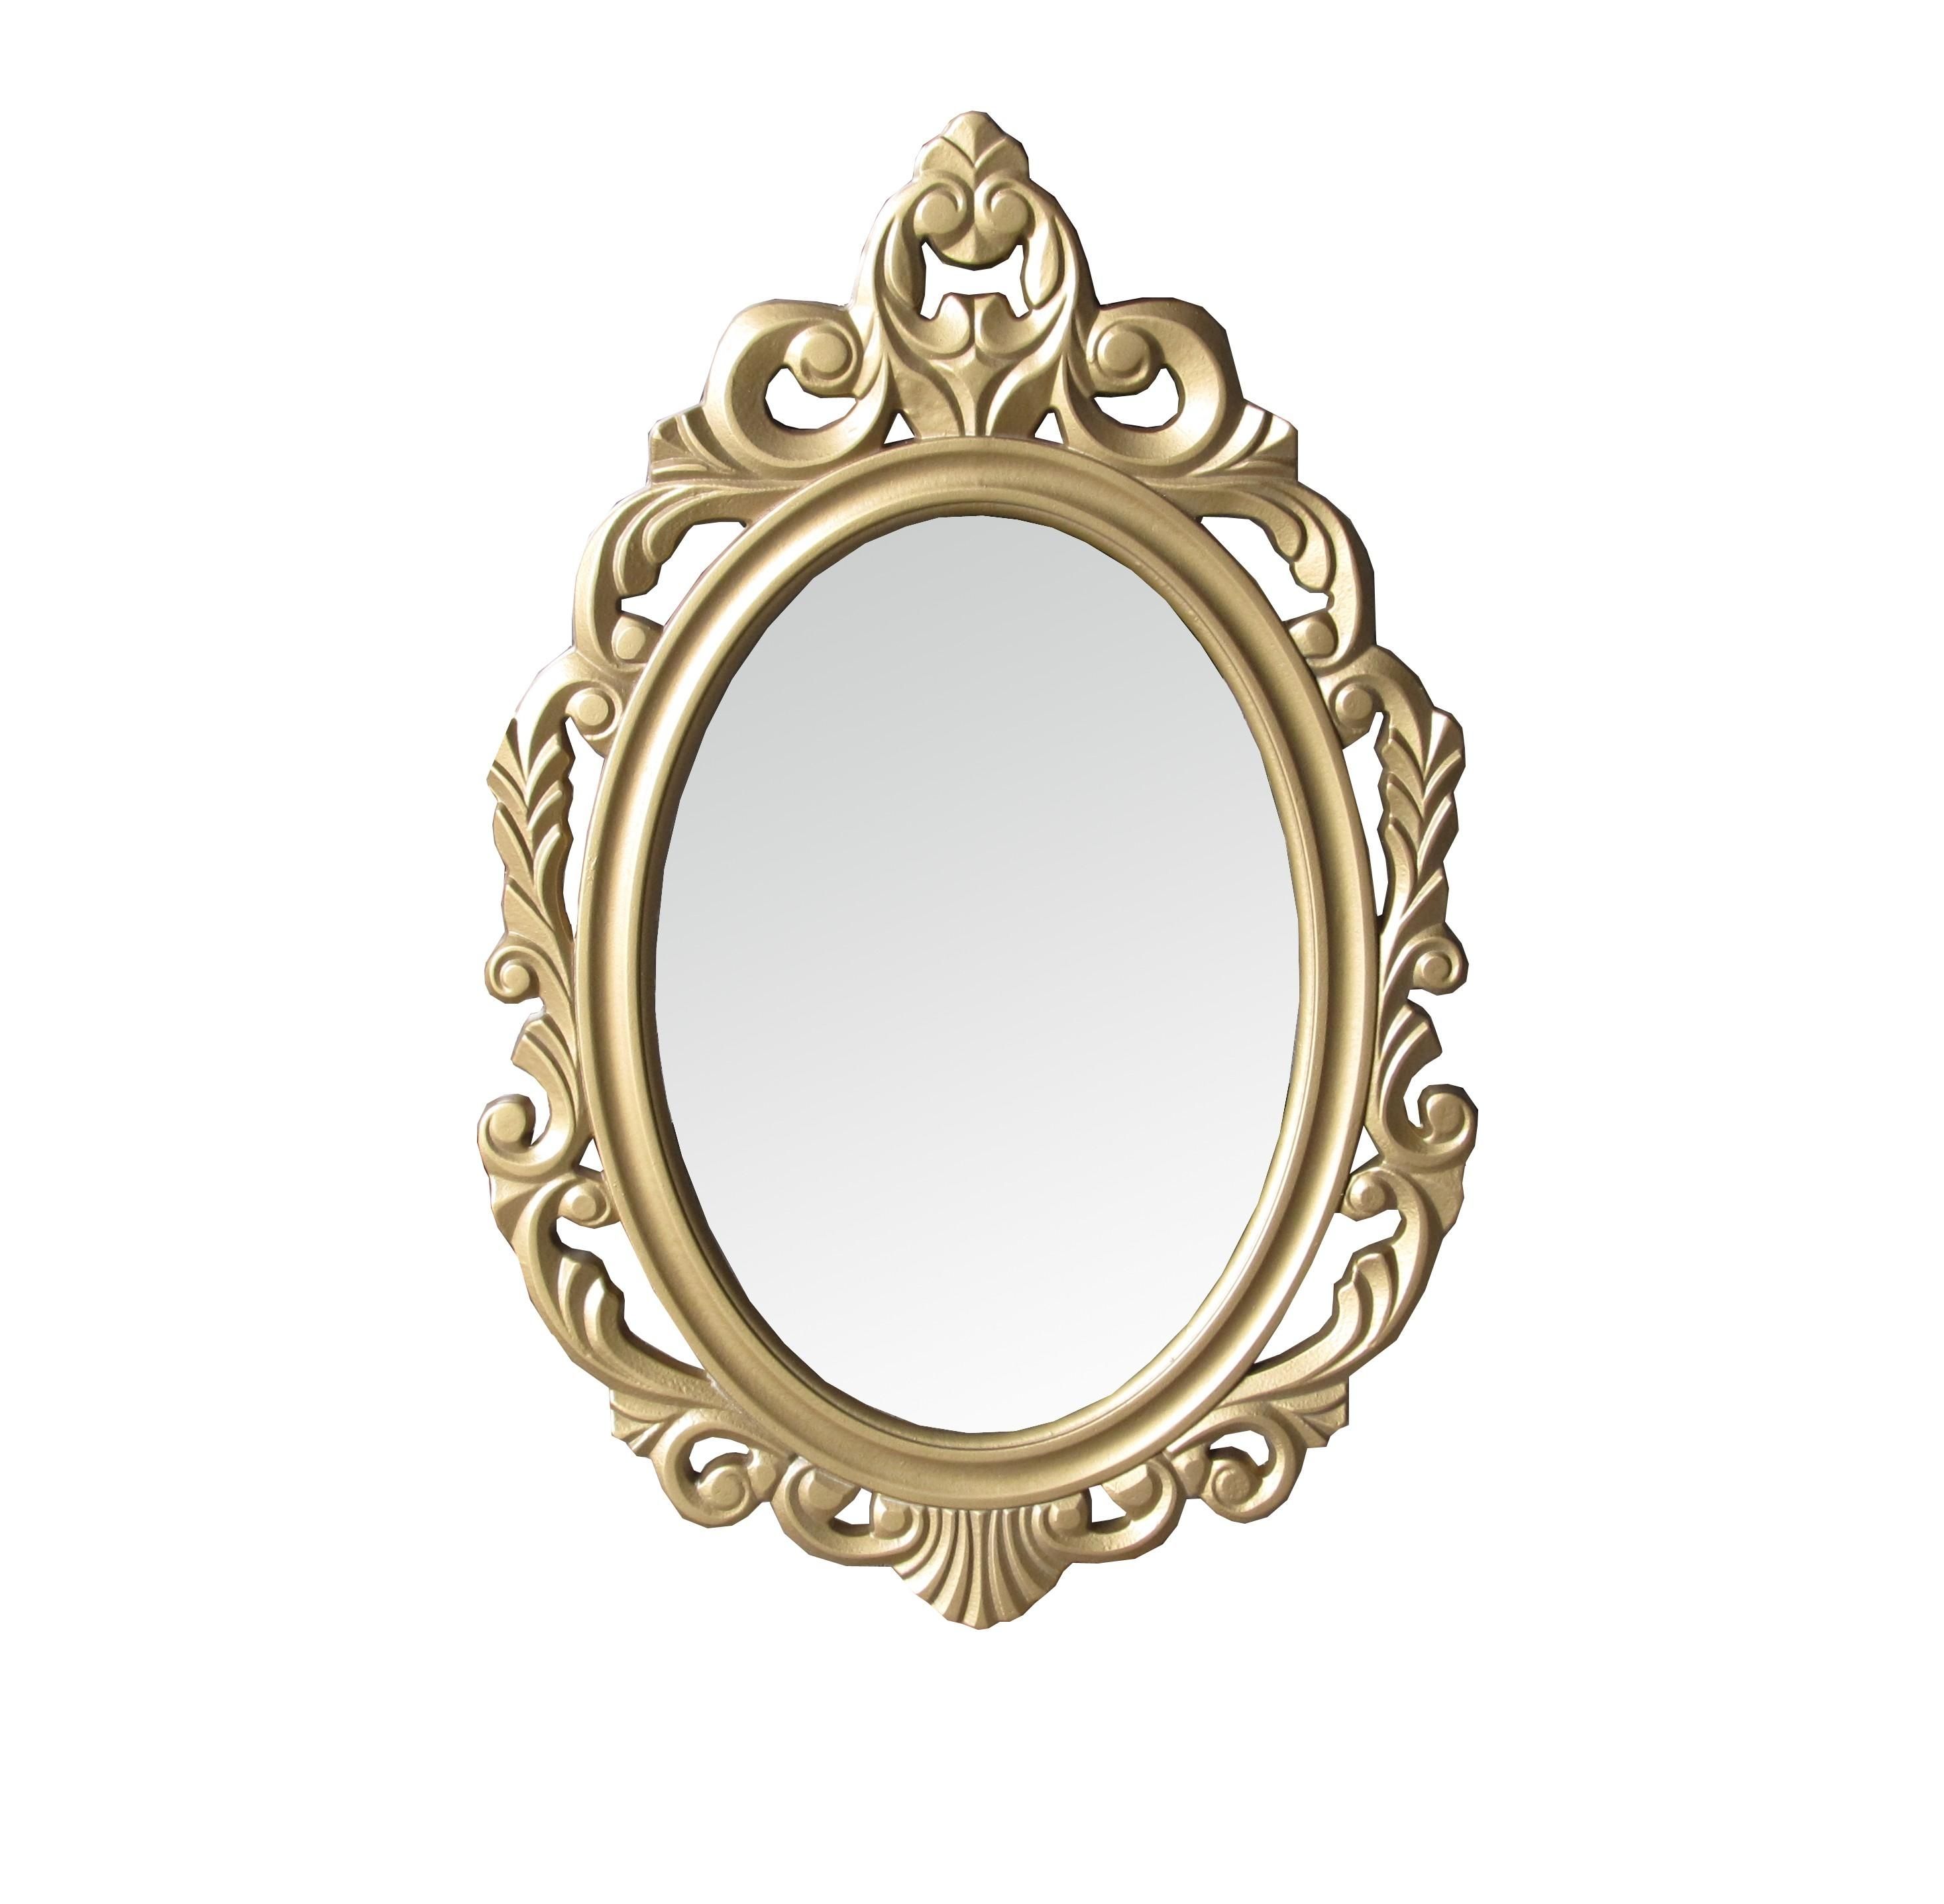 Interior & Decoration: Ornate Mirrors For Your Home Decoration With Ornate Oval Mirrors (View 9 of 20)